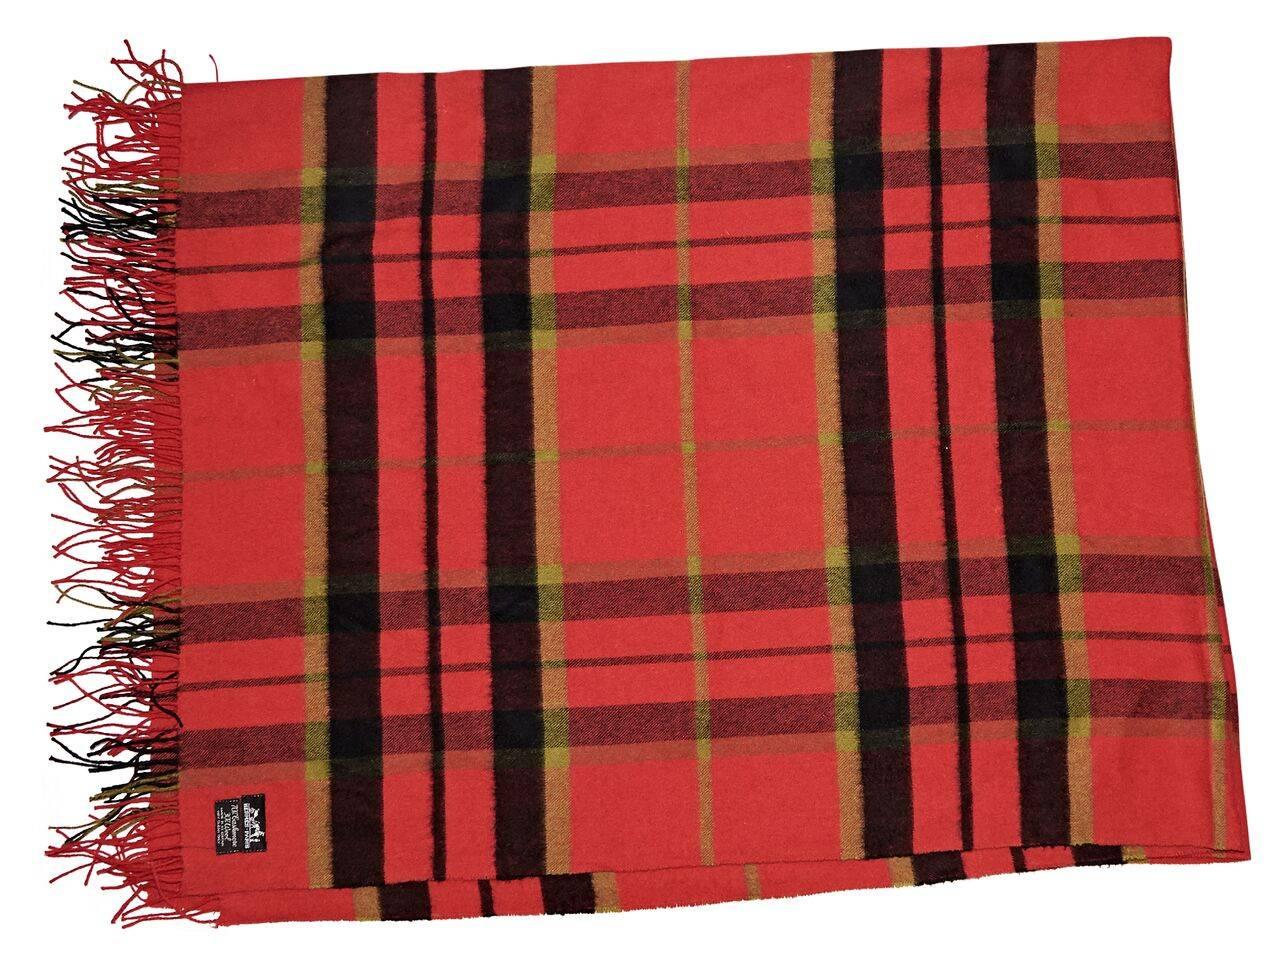 Product details:  Vintage red plaid blanket by Hermes.  Fringe trim.  Original box included.
Condition: Pre-owned. Very good.
Est. Retail $ 3,000.00